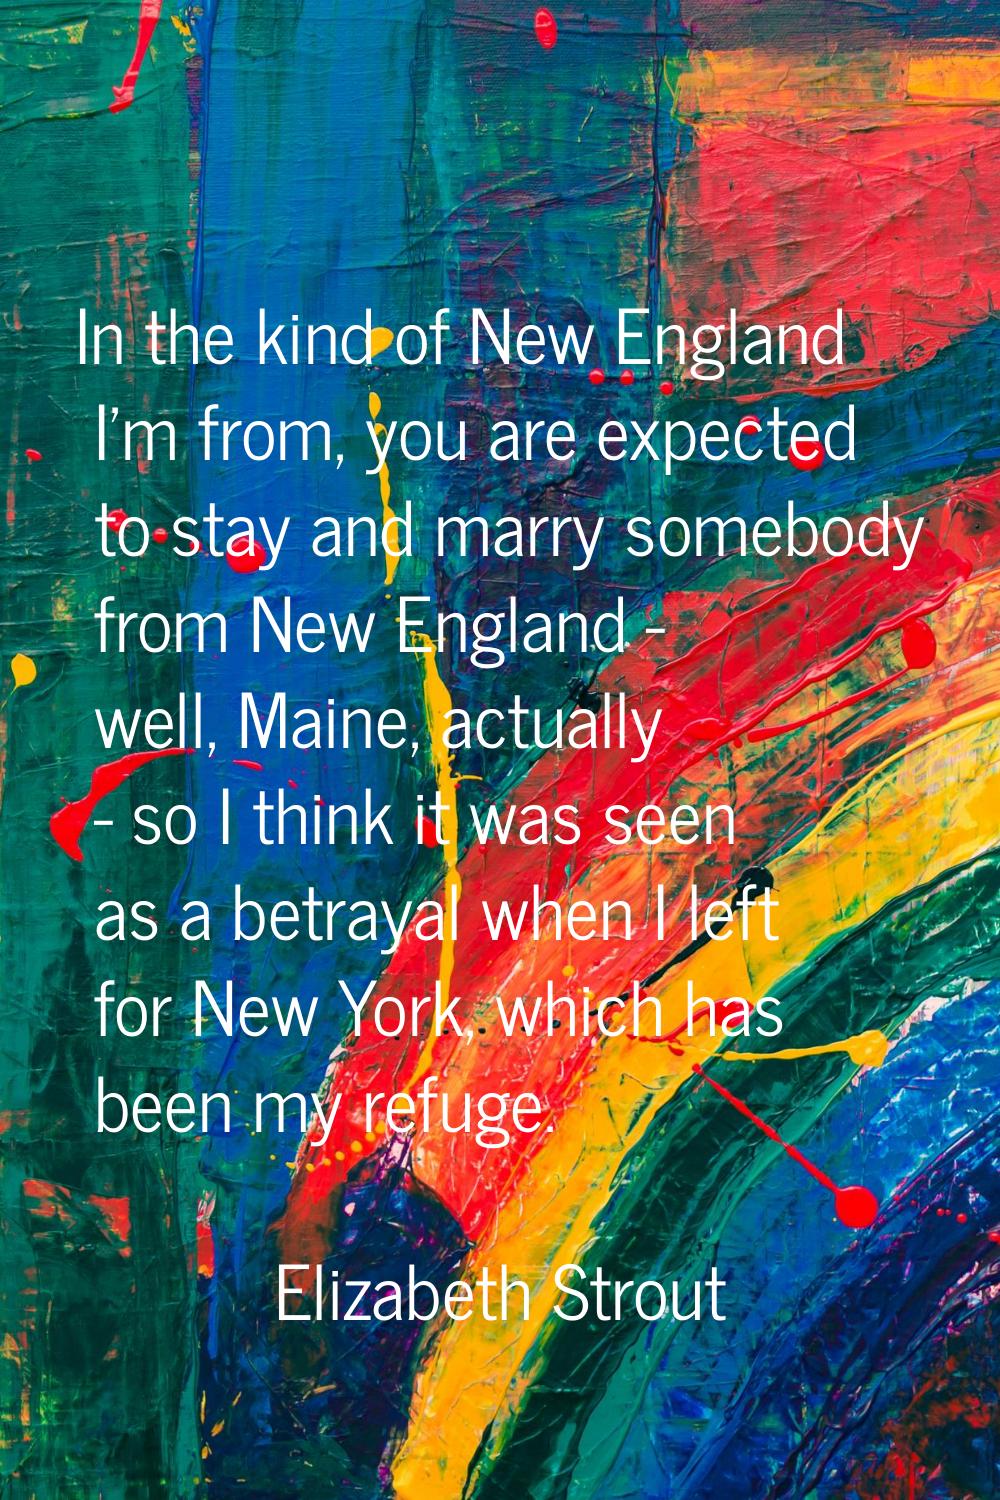 In the kind of New England I'm from, you are expected to stay and marry somebody from New England -